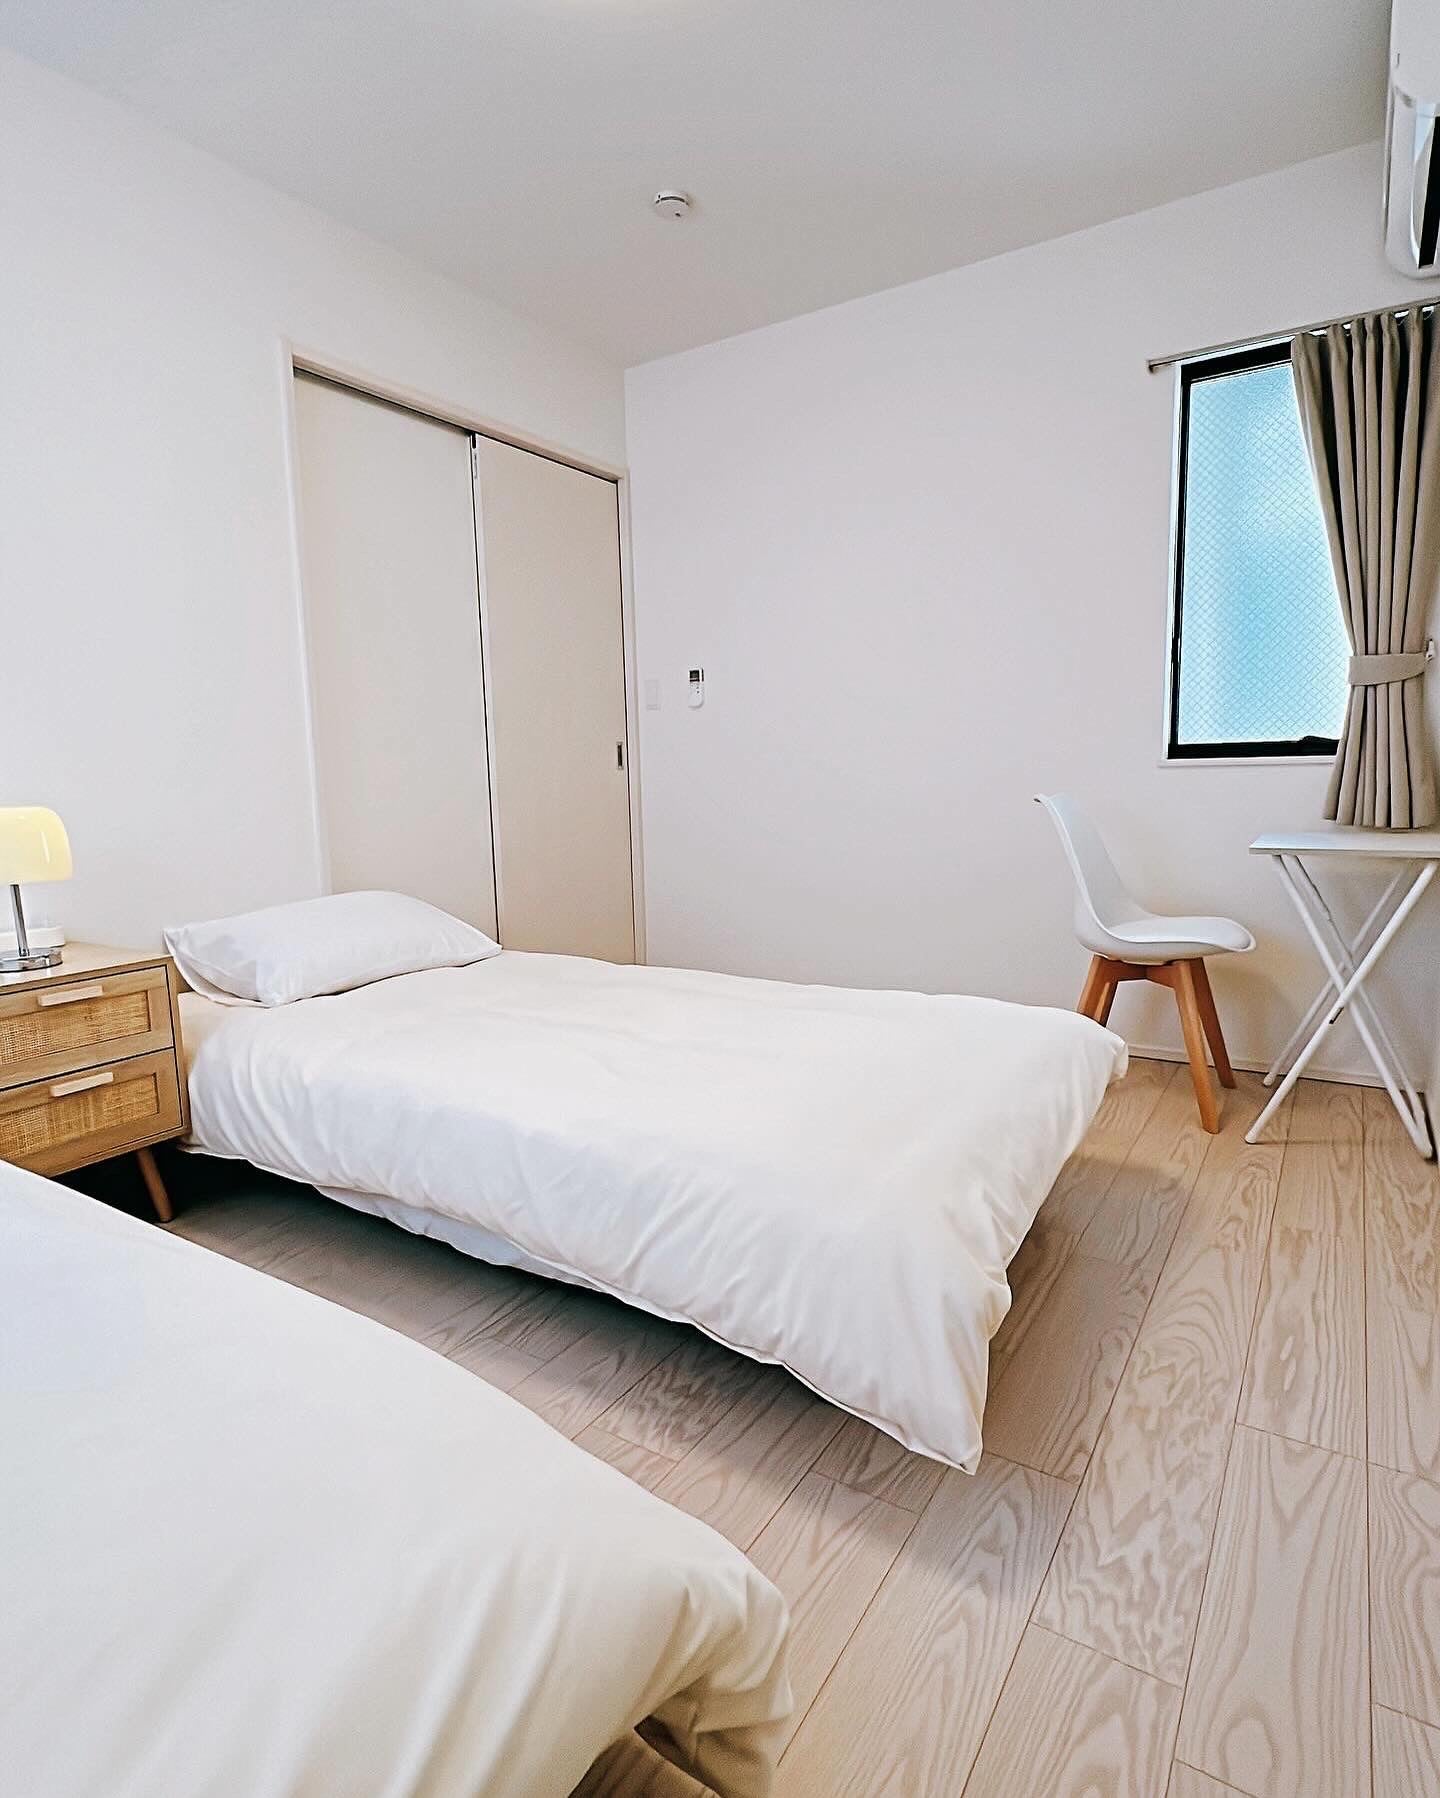 8-minute walk from Kitatoda Station, monthly rent of 500,000 yen (no additional costs other than monthly rent)